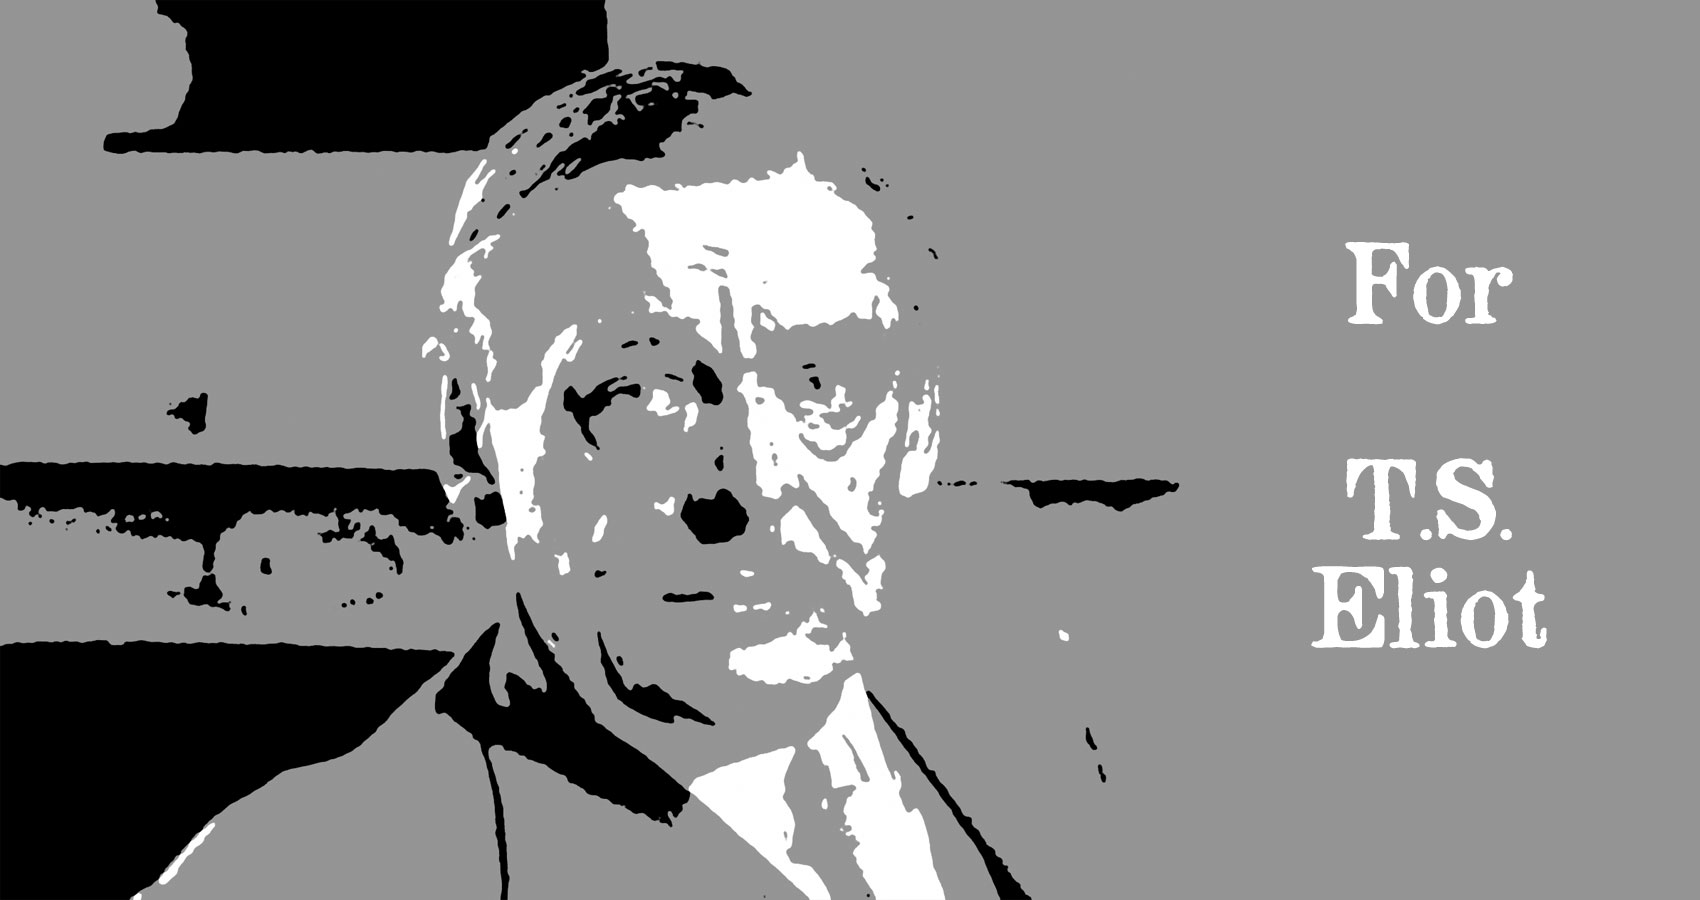 For T.S. Eliot by Thomas Park at Spillwords.com